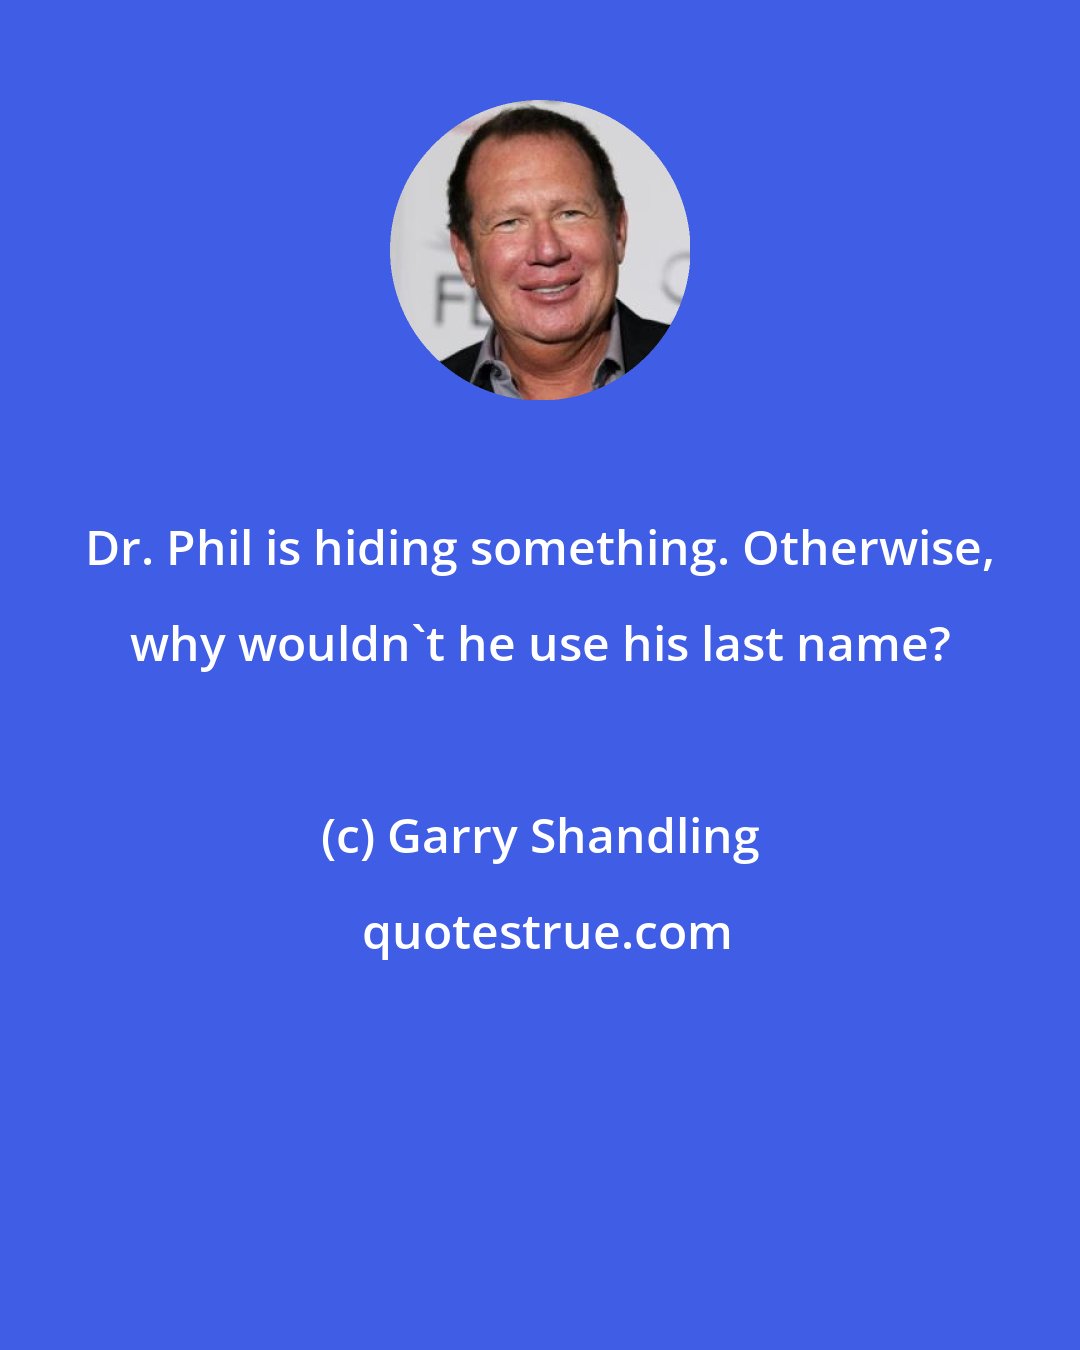 Garry Shandling: Dr. Phil is hiding something. Otherwise, why wouldn't he use his last name?